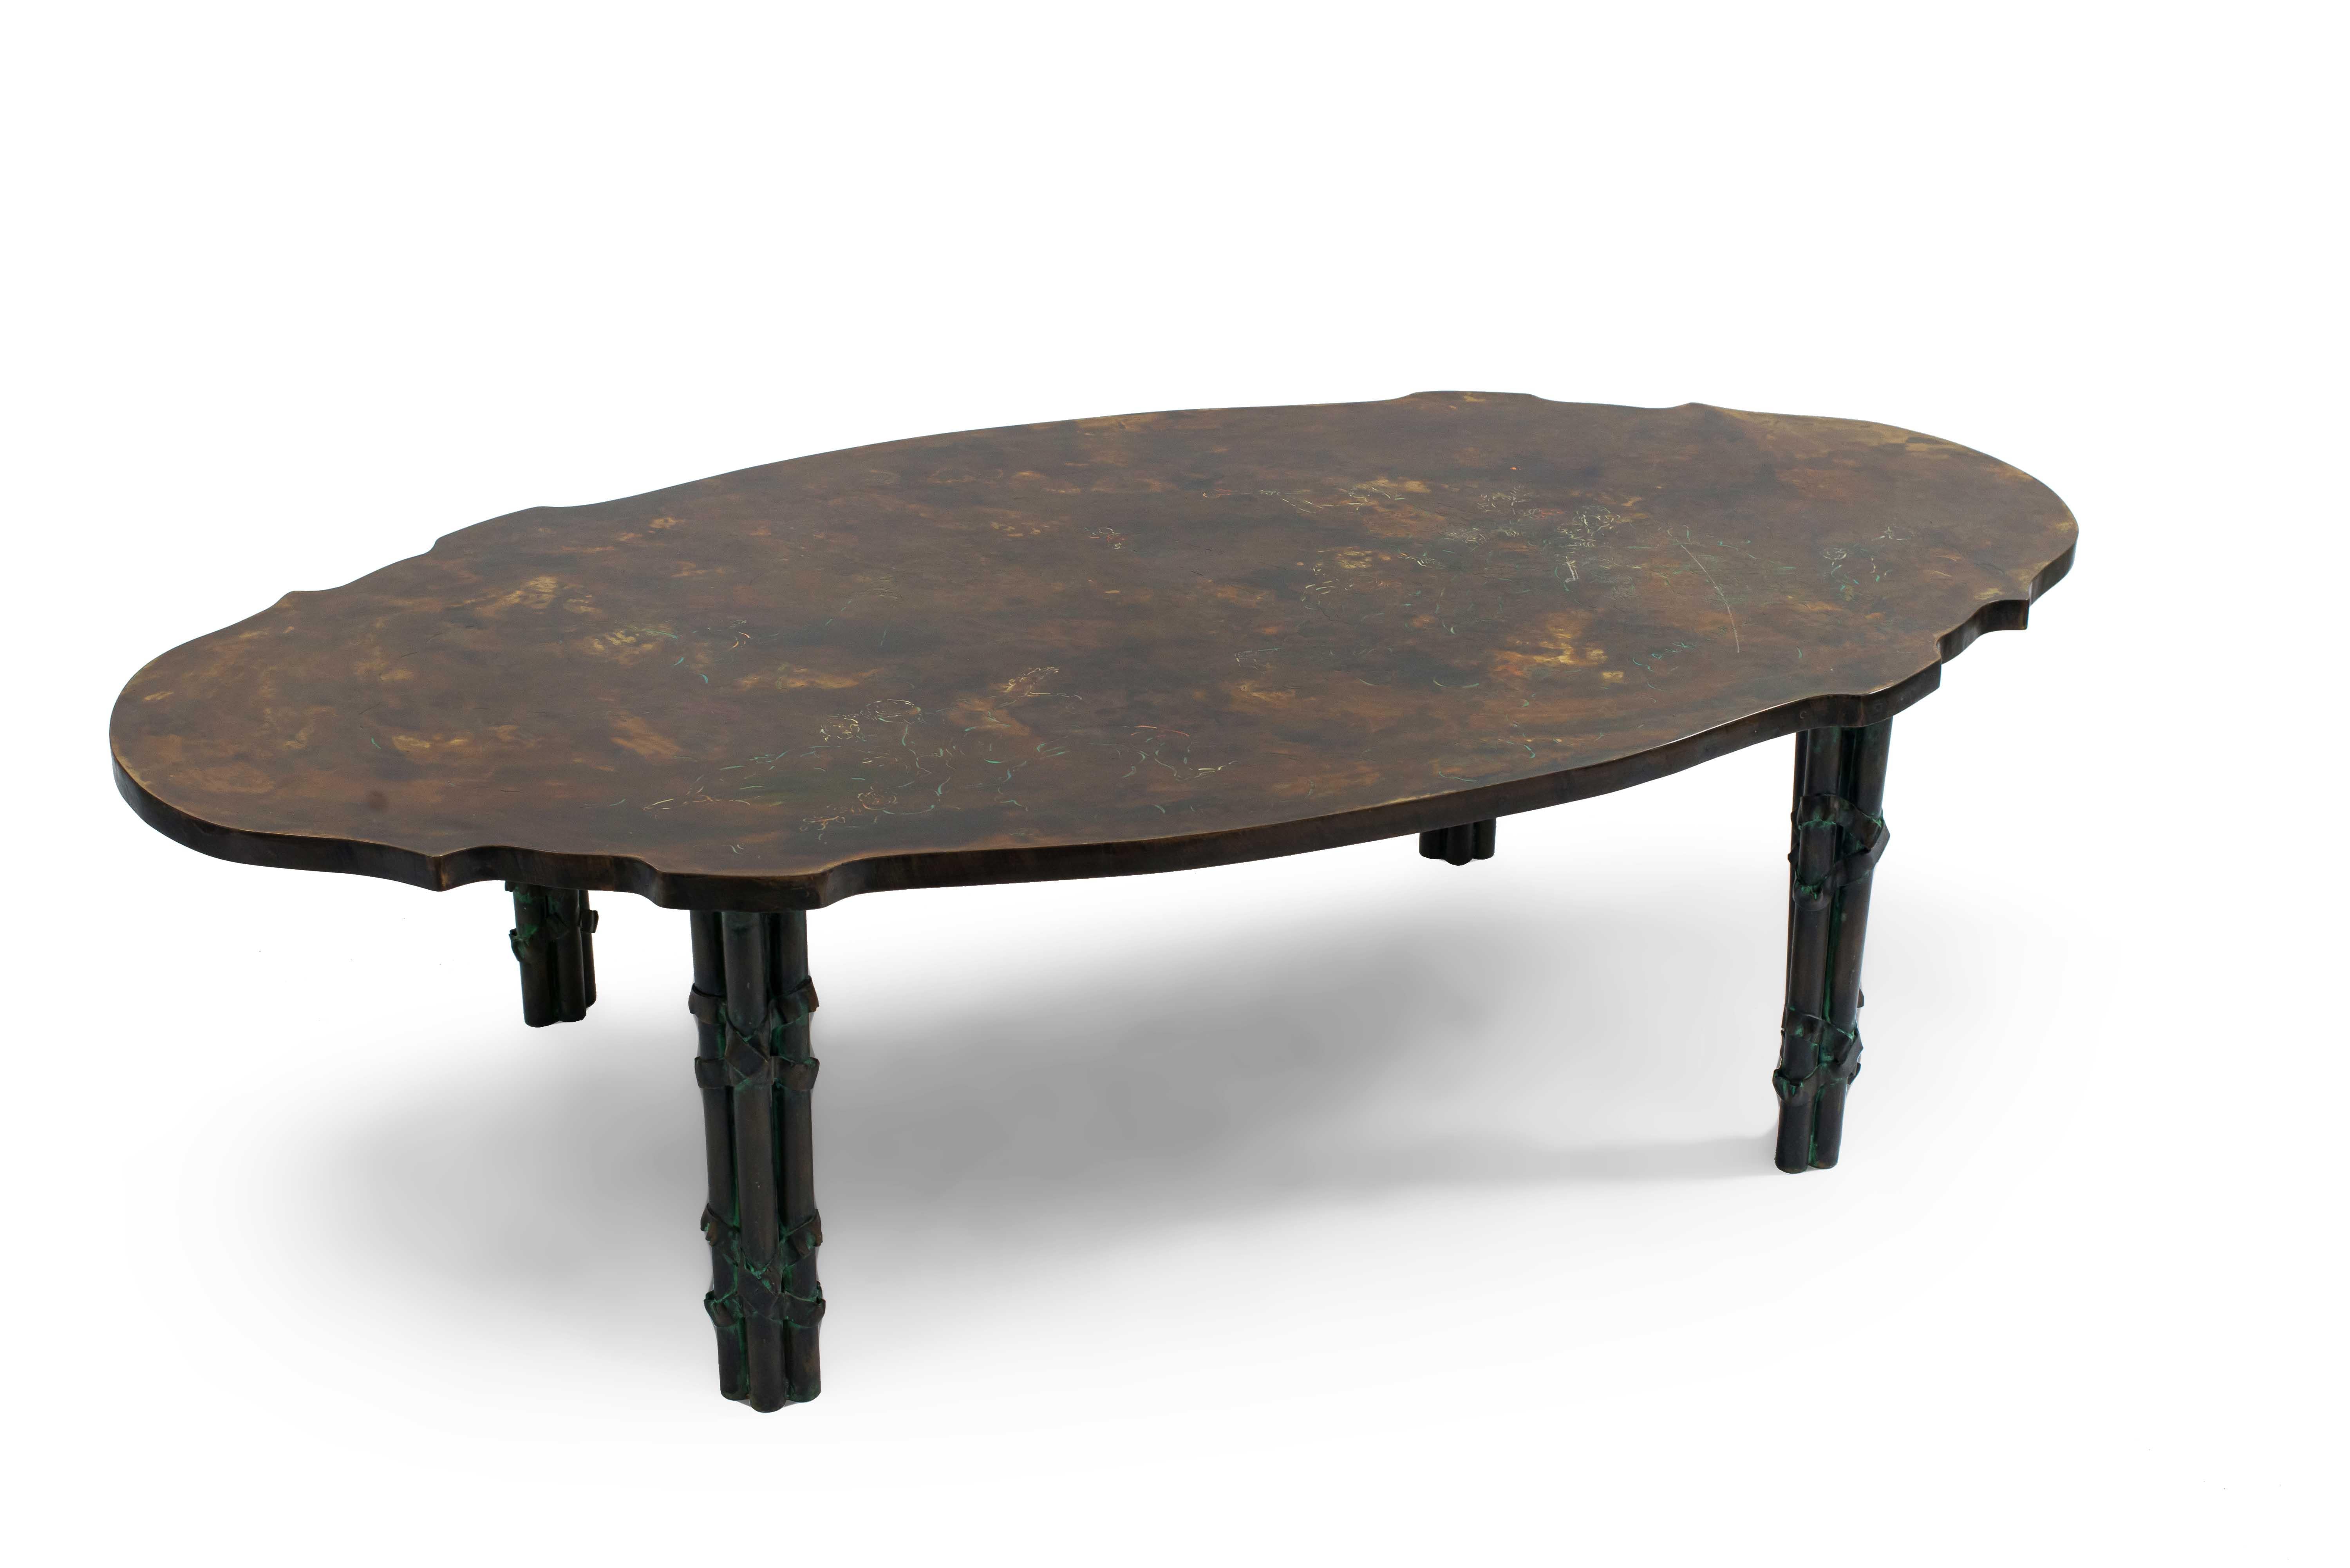 American midcentury patinaed bronze oval shaped coffee table with etched floral design supported on four cluster bamboo legs (by Philip and Kelvin LaVerne).


The father and son team of Philip and Kelvin LaVerne created custom, limited edition